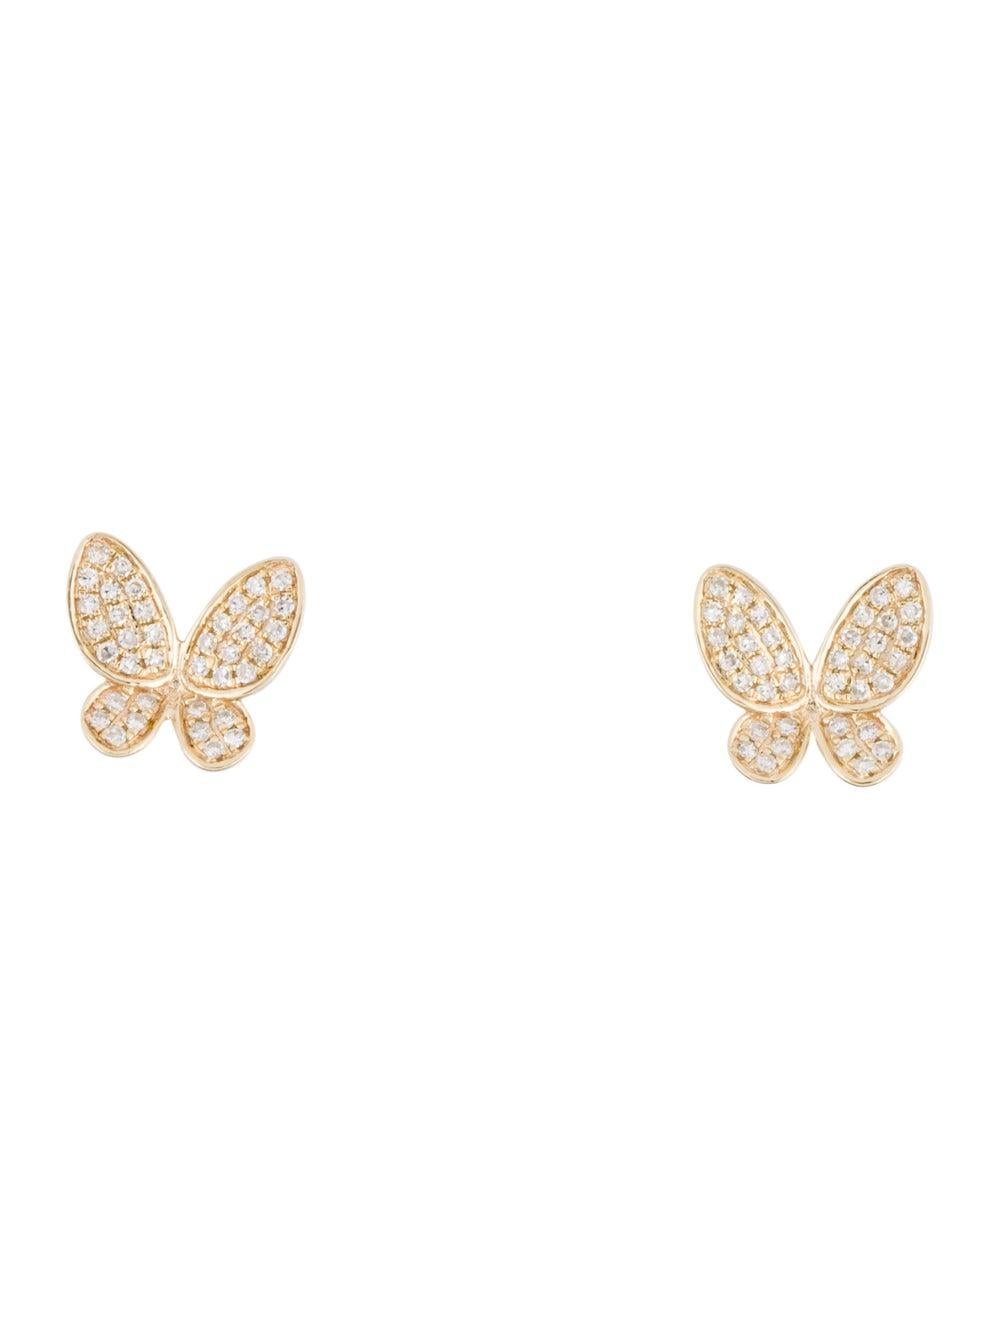 Contemporary 14K Rose Gold 0.20 Carat Diamond Butterfly Earrings For Sale